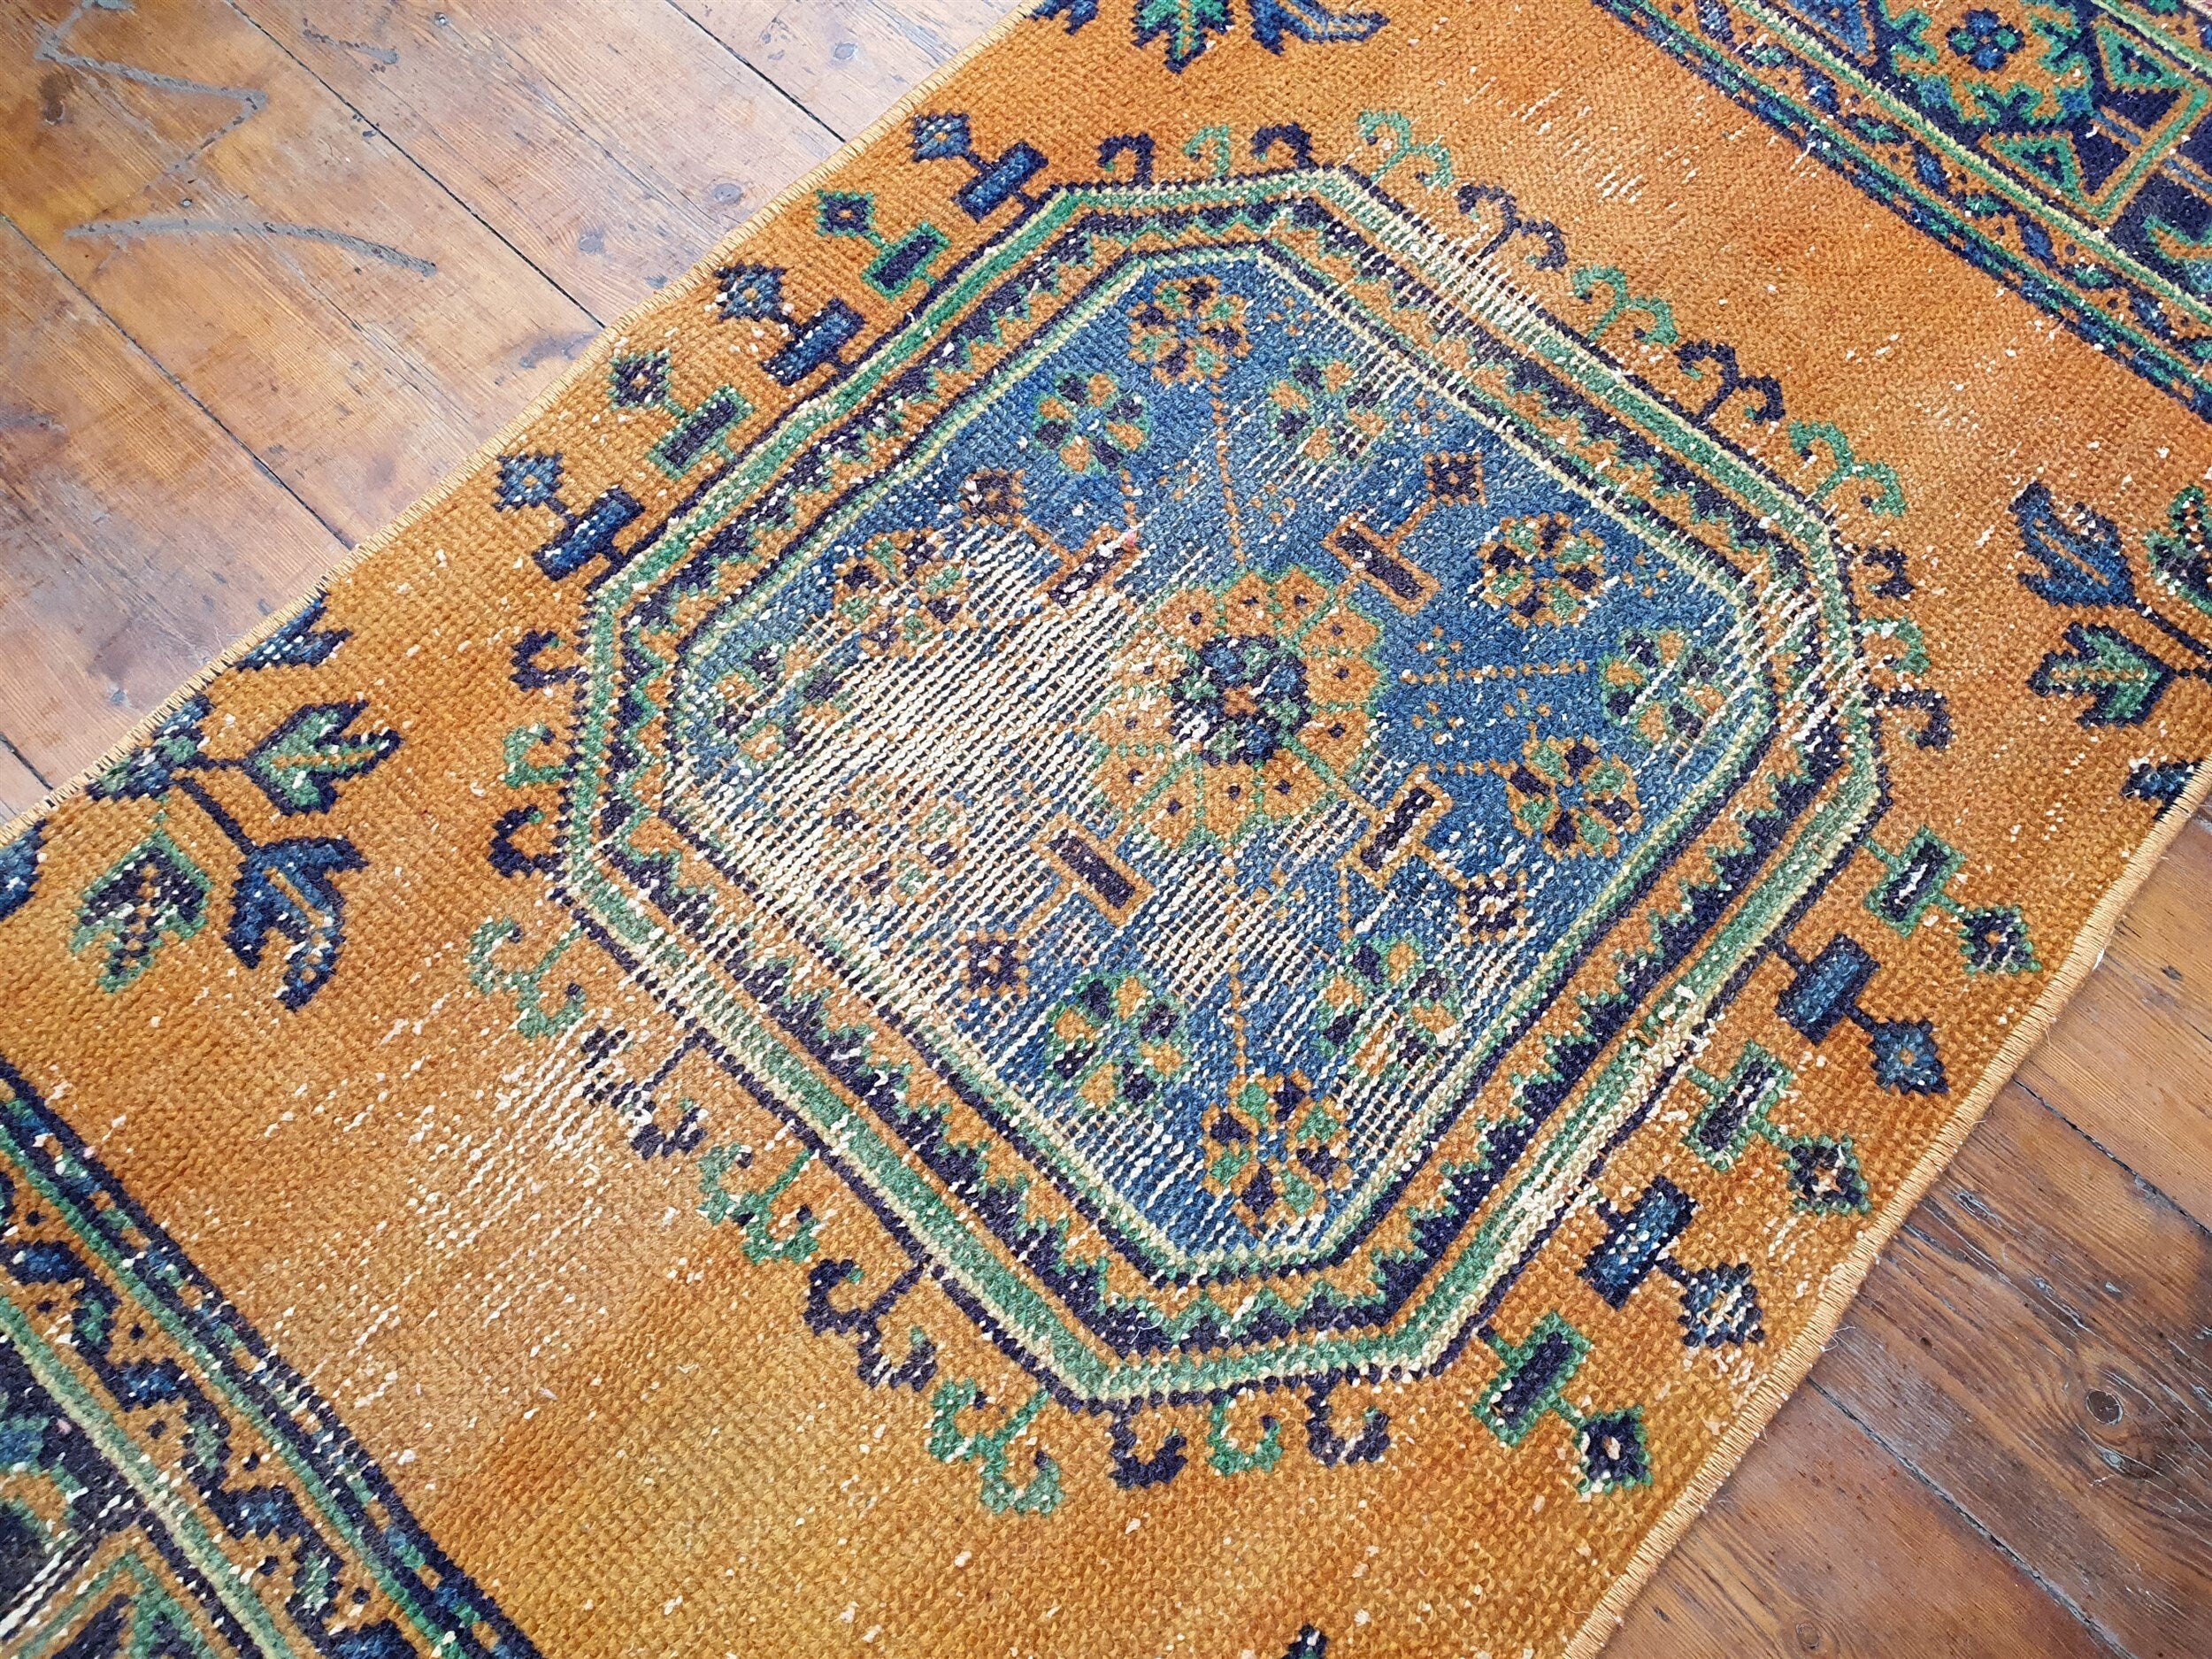 Small Turkish Rug, 4 ft 1 in x 1 ft 8 in, Apricot Orange and Teal Green / Grey Vintage Faded Distressed Door Mat